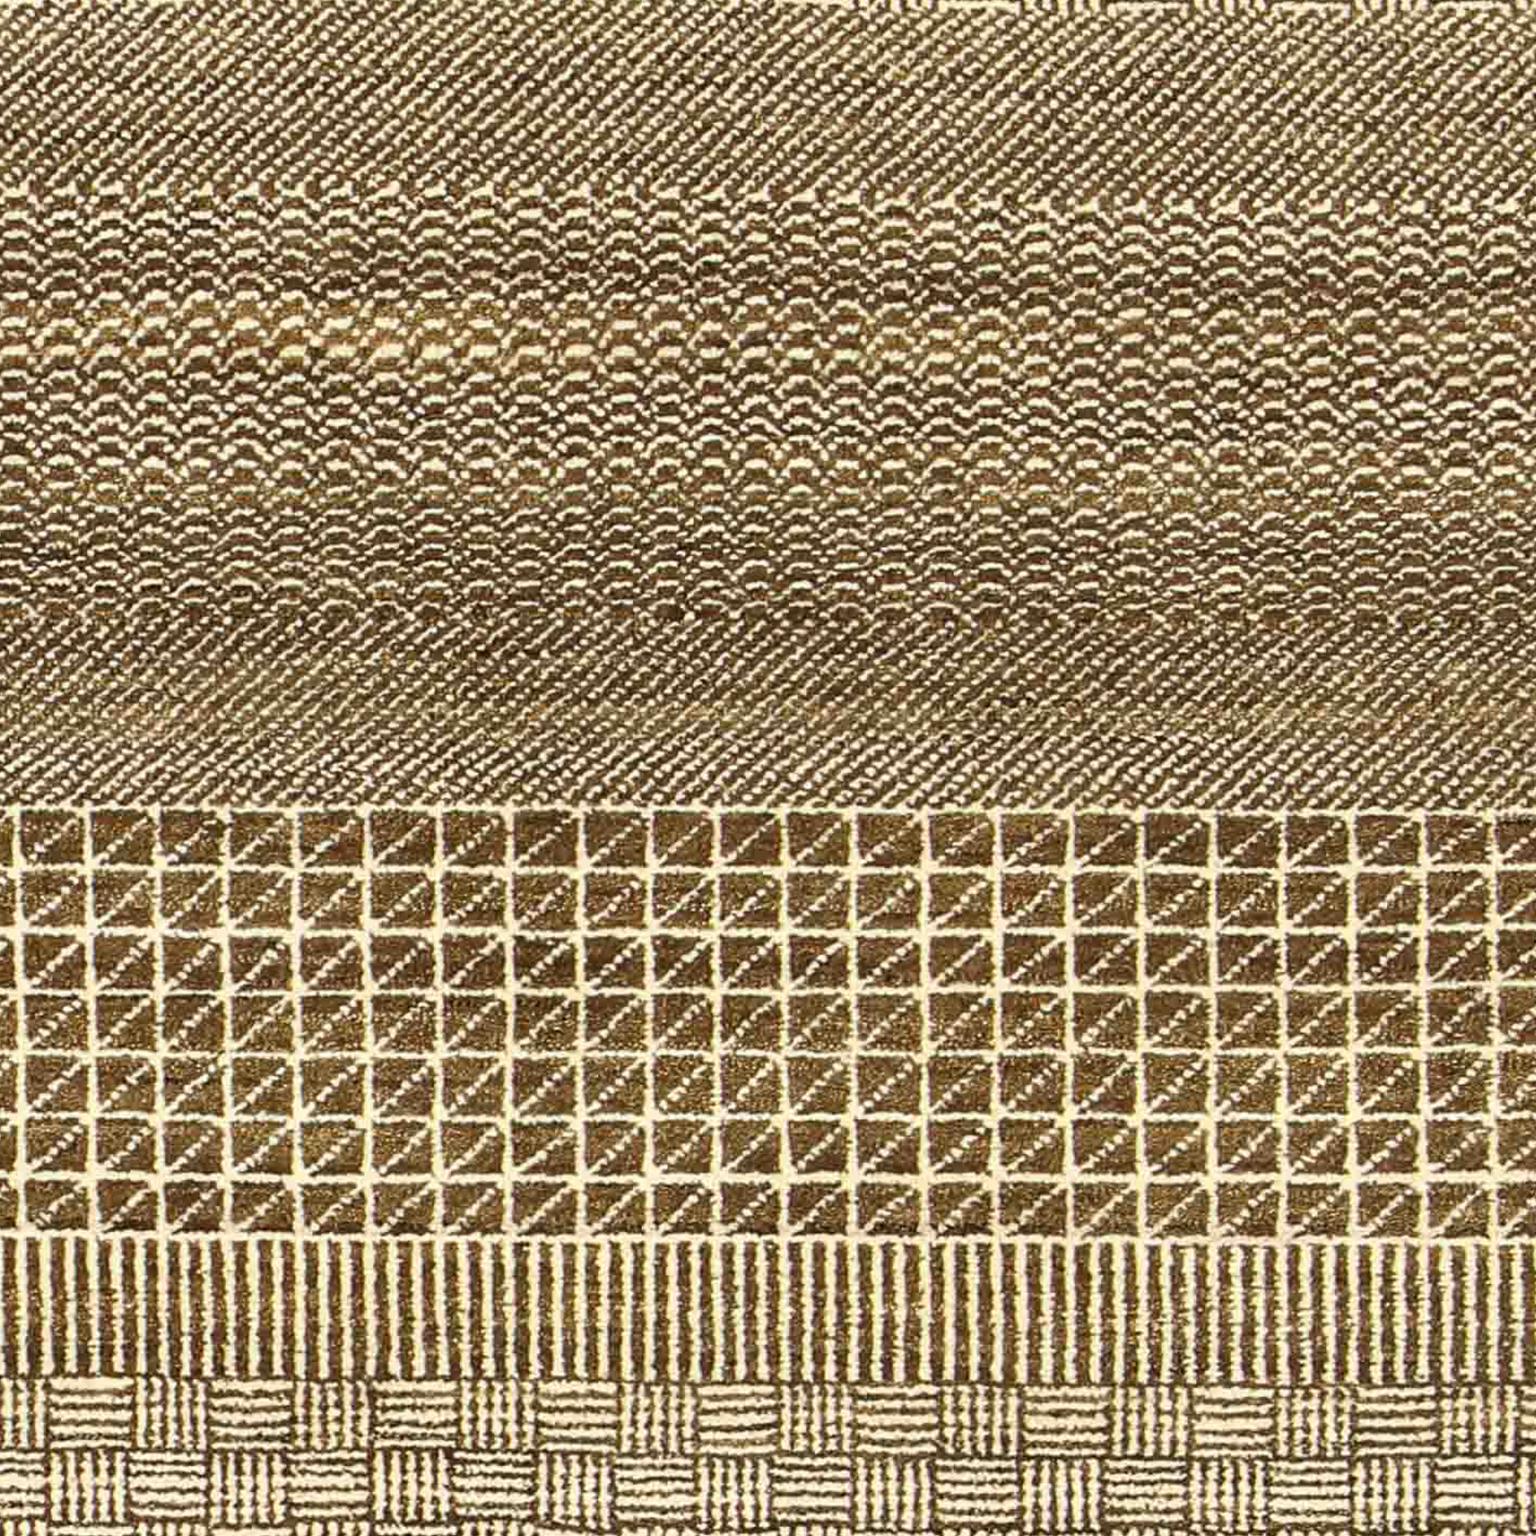 This 6’ x 9’ Orley Shabahang signature “Rain” carpet showcases a modern design in a hand knotted Persian weave. This carpet, from the Orley Shabahang Rain collection, features a simple pattern made from pure handspun wool and organic dyes that